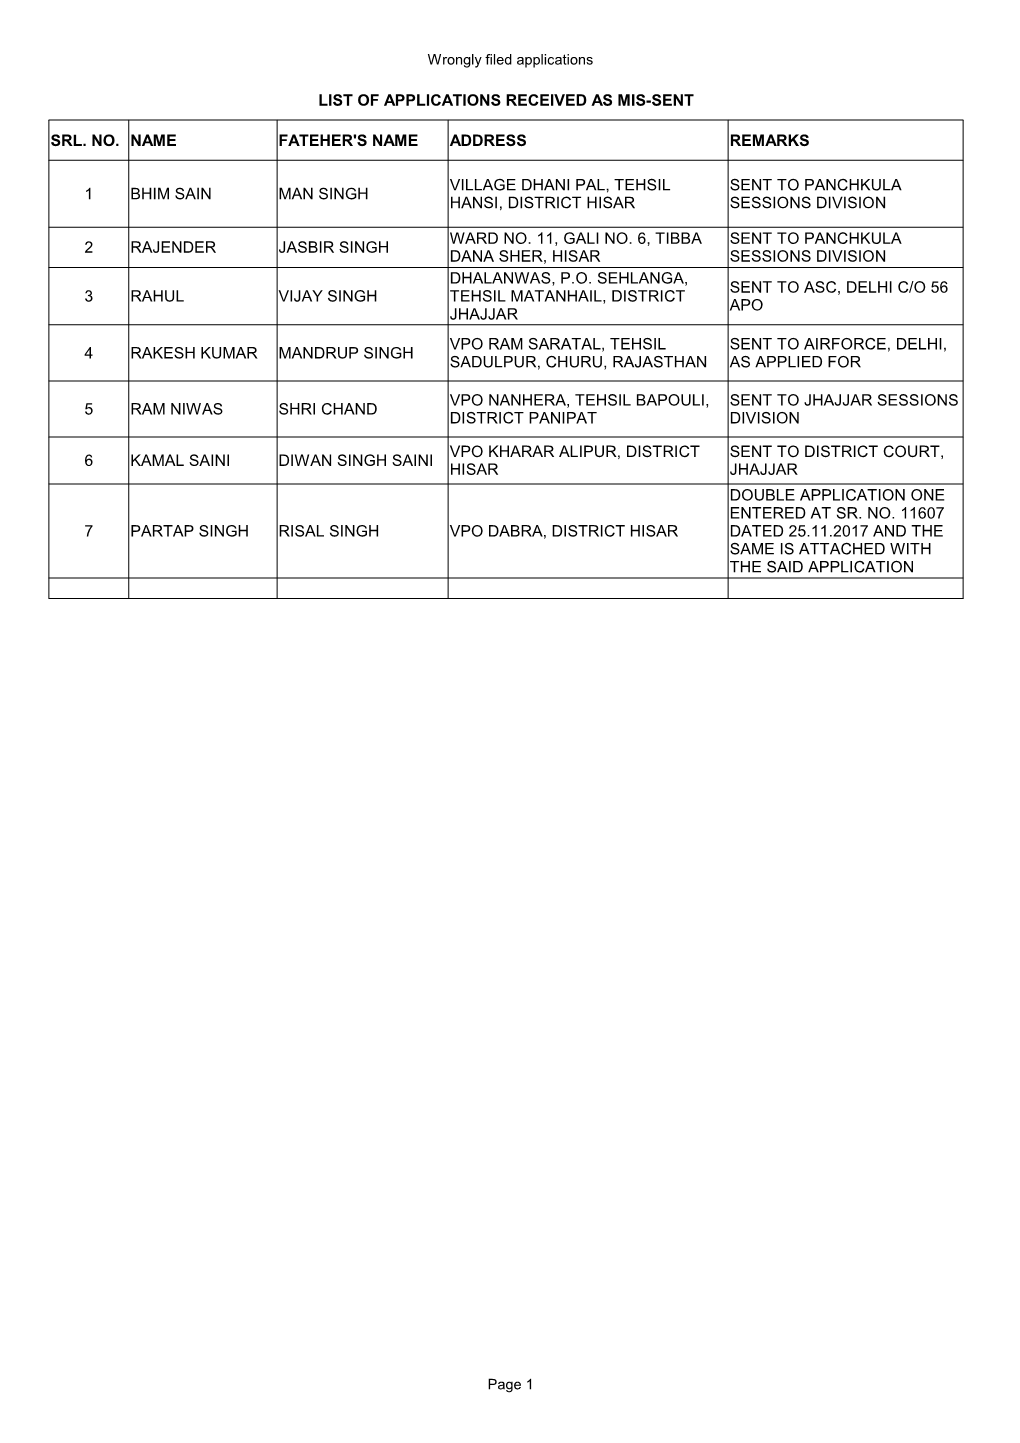 Wrongly Filed Applications Page 1